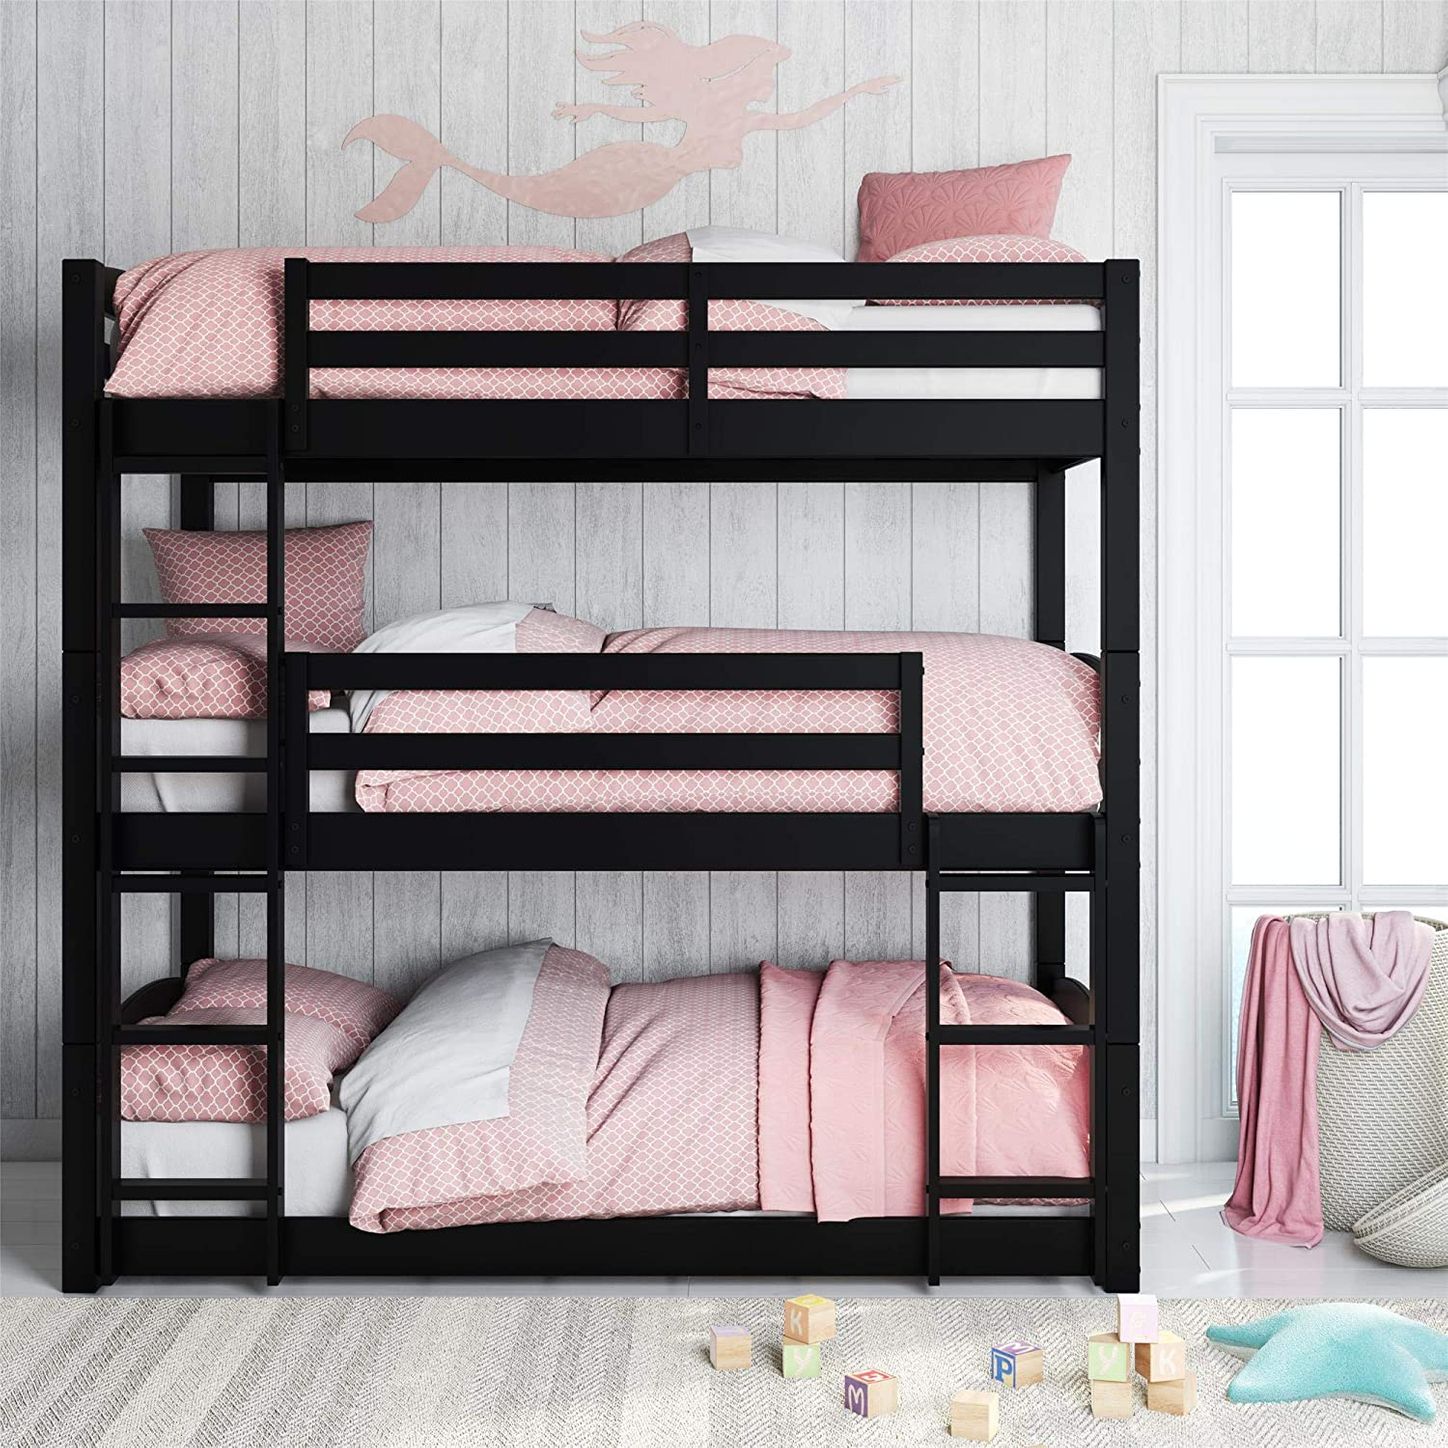 8 Best Bunk Beds 2020 The Strategist, Best Rated Bunk Beds